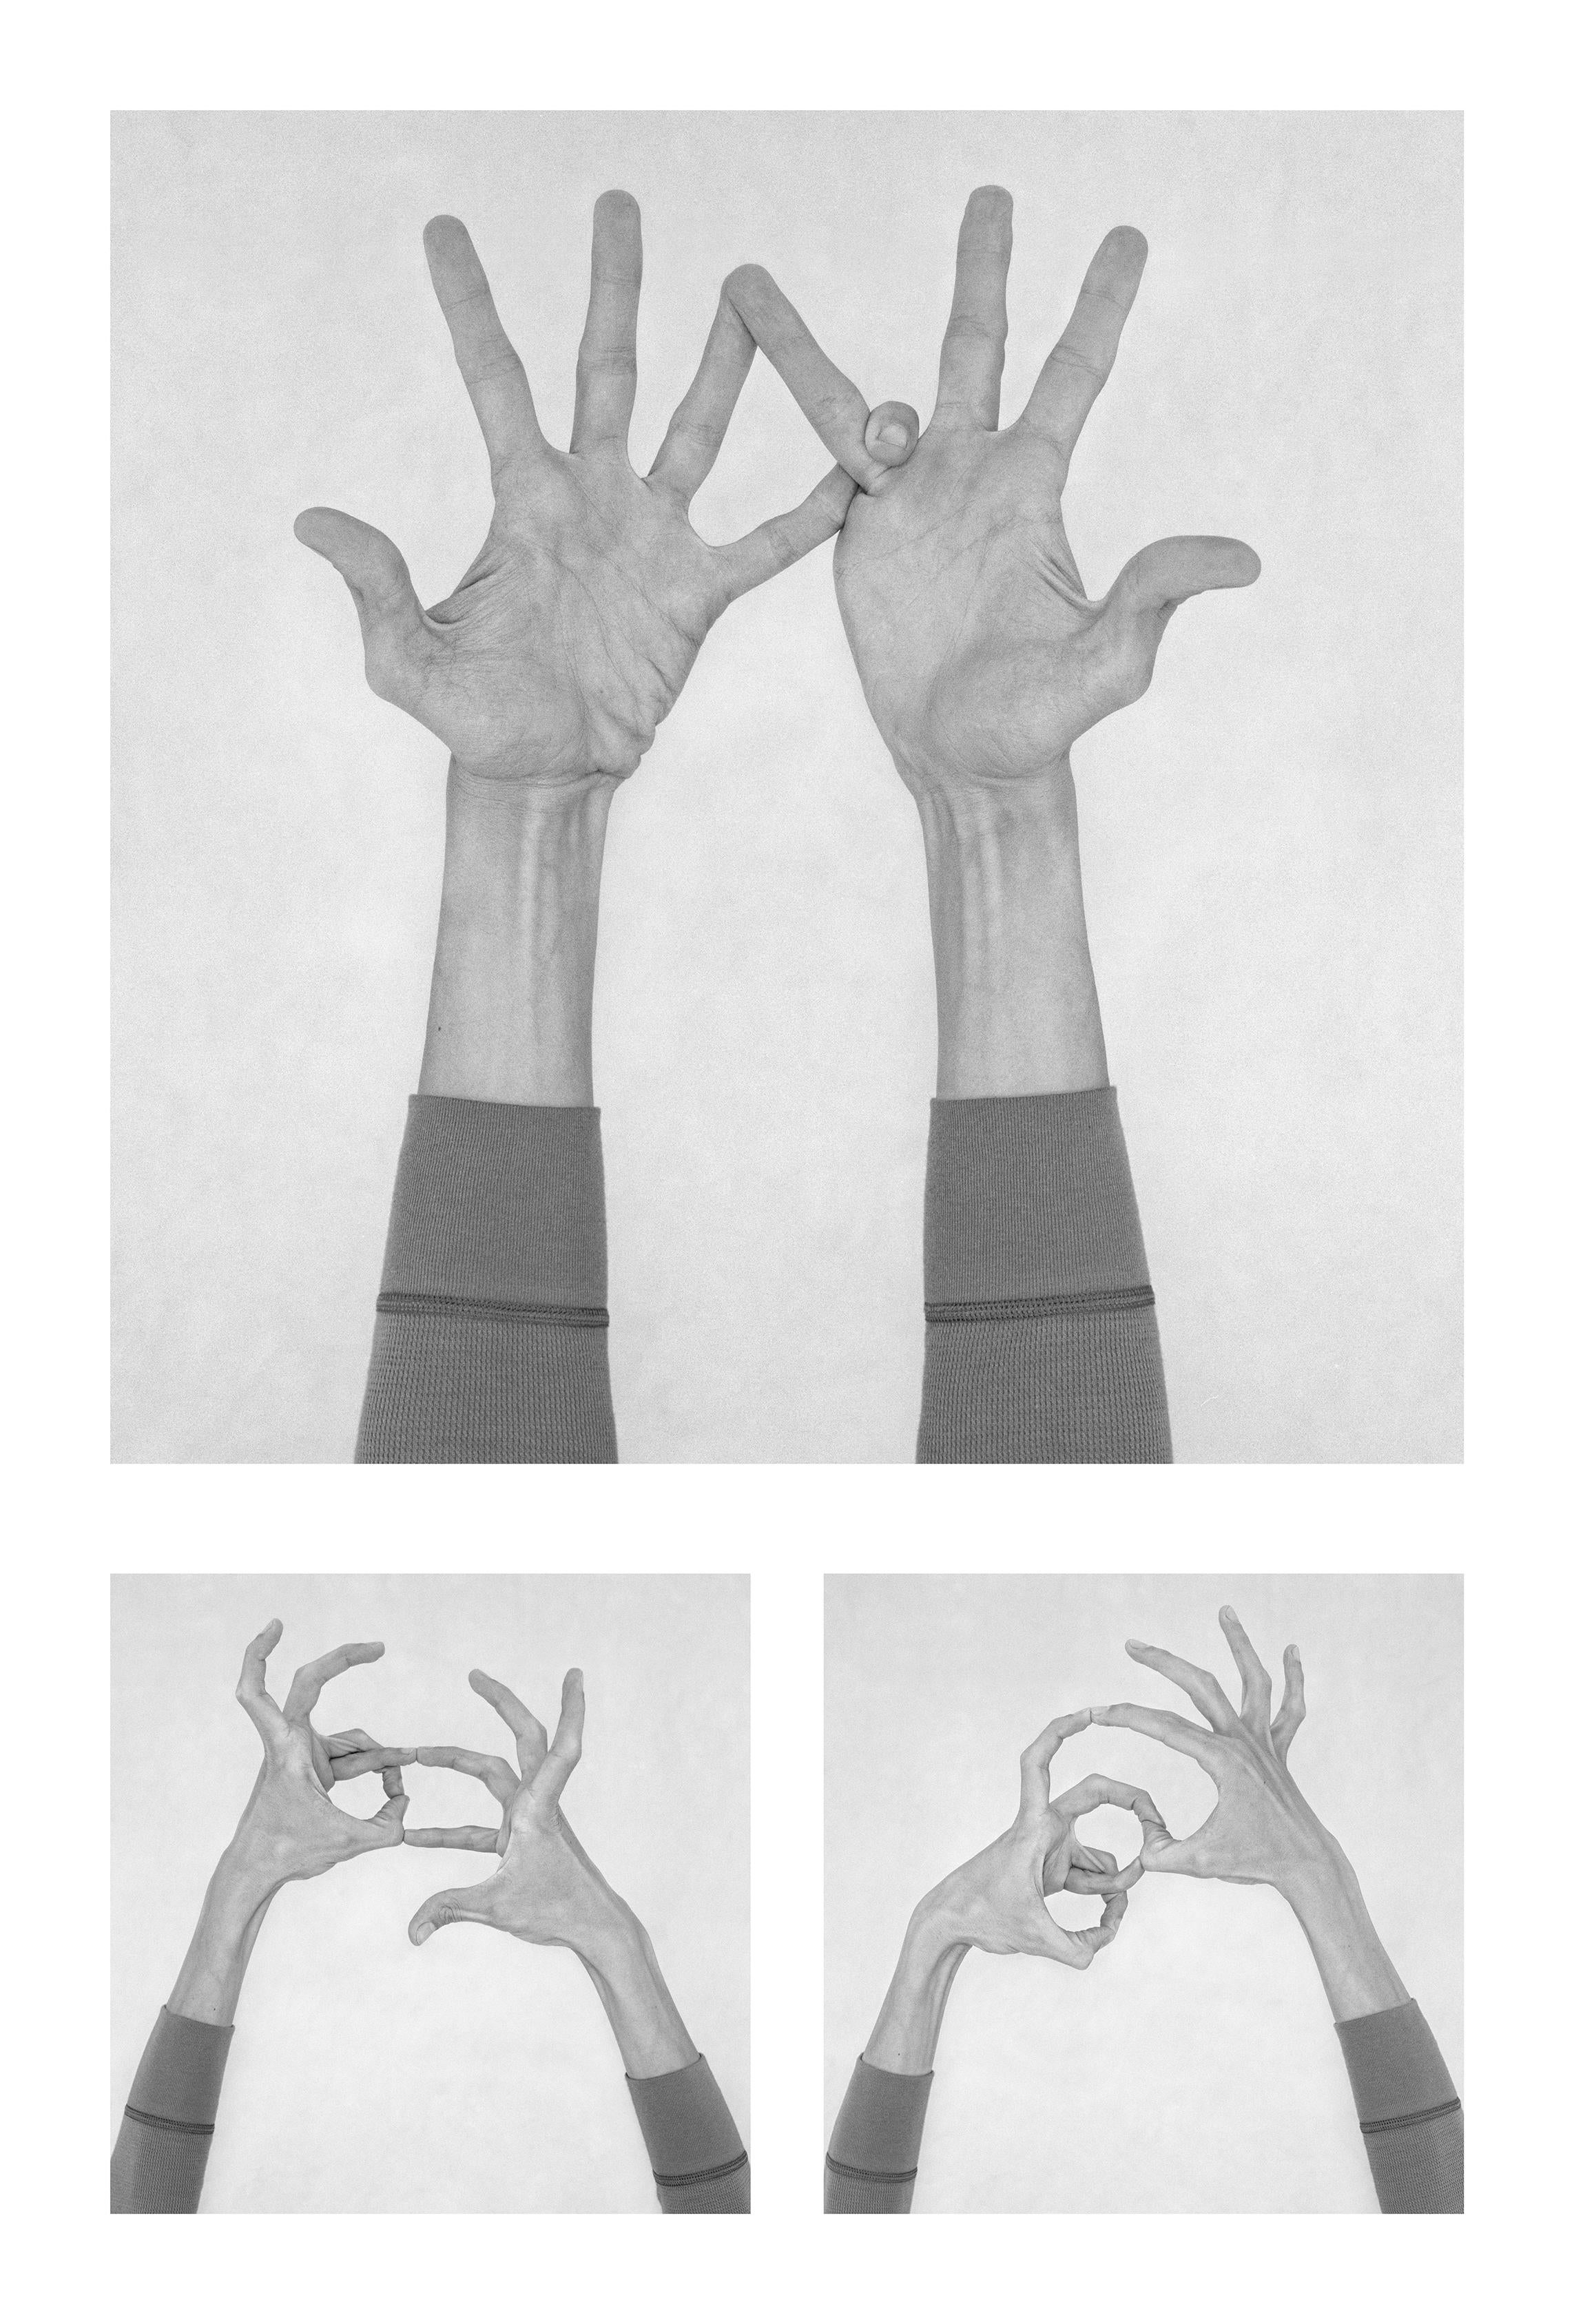 Nico Baixas / Gos-com-fuig Figurative Photograph - Untitled I, Untitled II, and Untitled XI, Hands. From the Series Chiromorphose